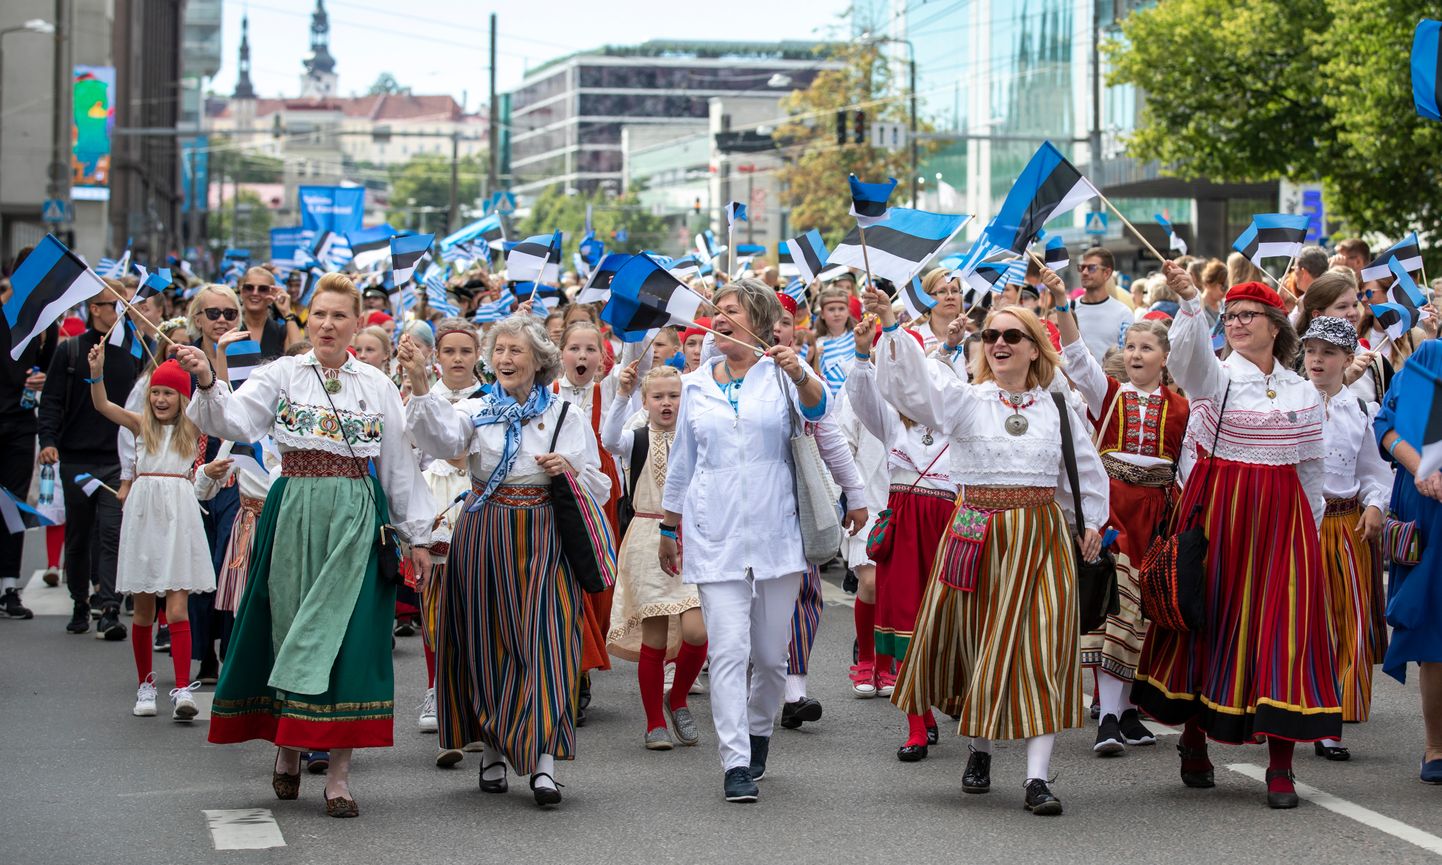 Tallinn, Estonia, 6th July, 2019: people in traditional clothing in streets of Tallinn walking towards song festival grounds during a festival called ‘laulupidu’ held every 5 years